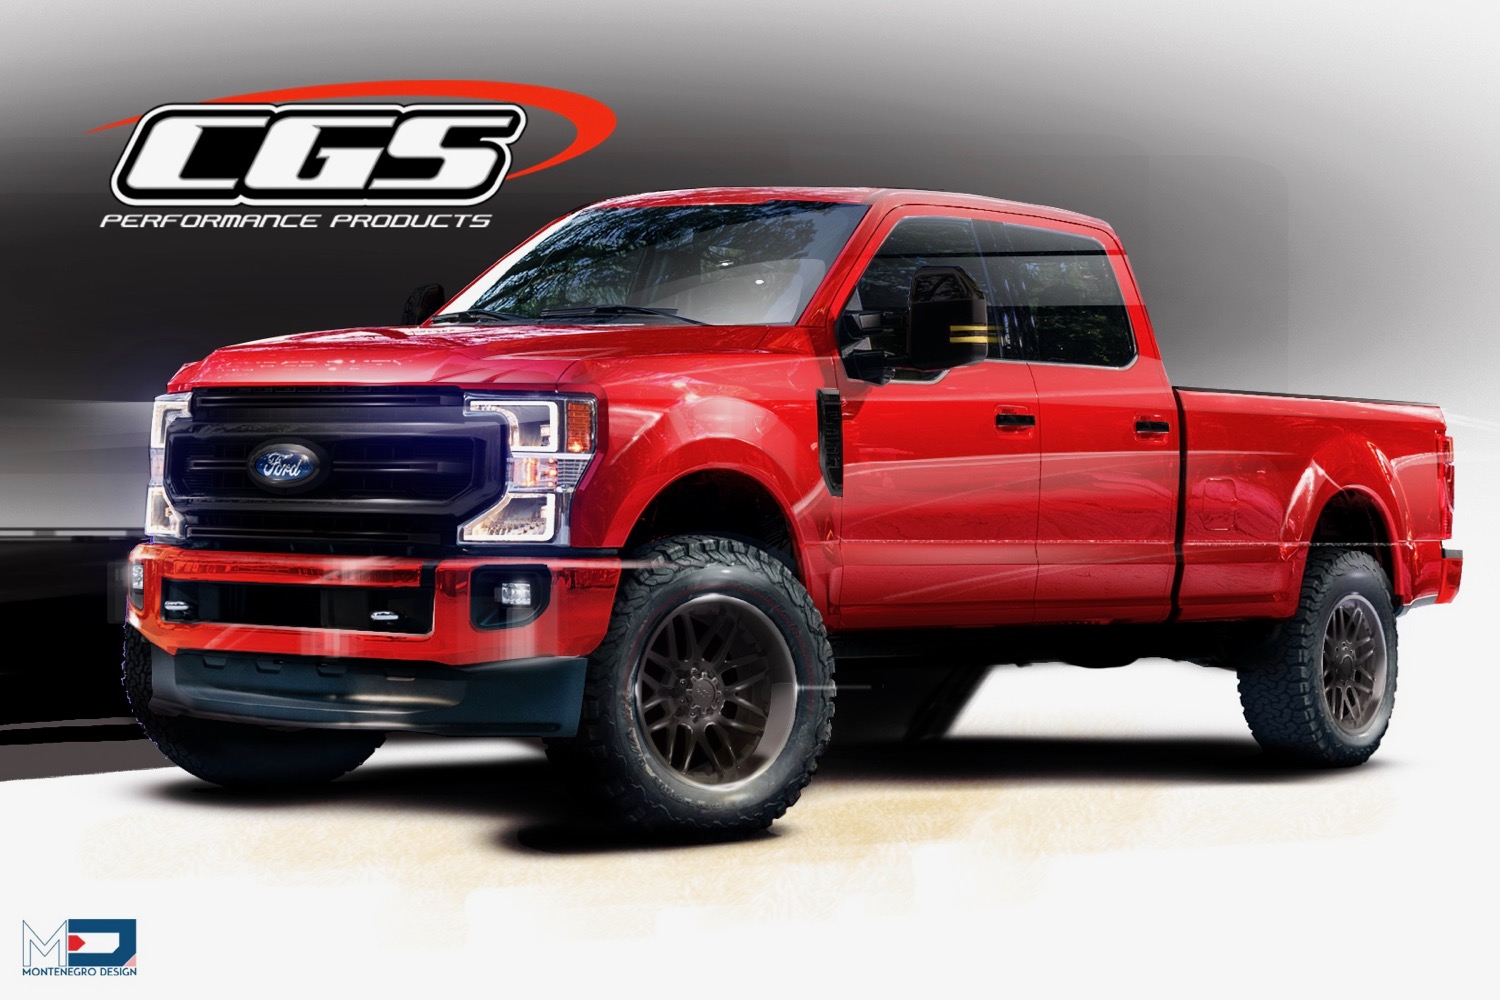 2020 ford f series super duty at sema 2019 cgs performance products 250 tremor crew cab with black appearance package